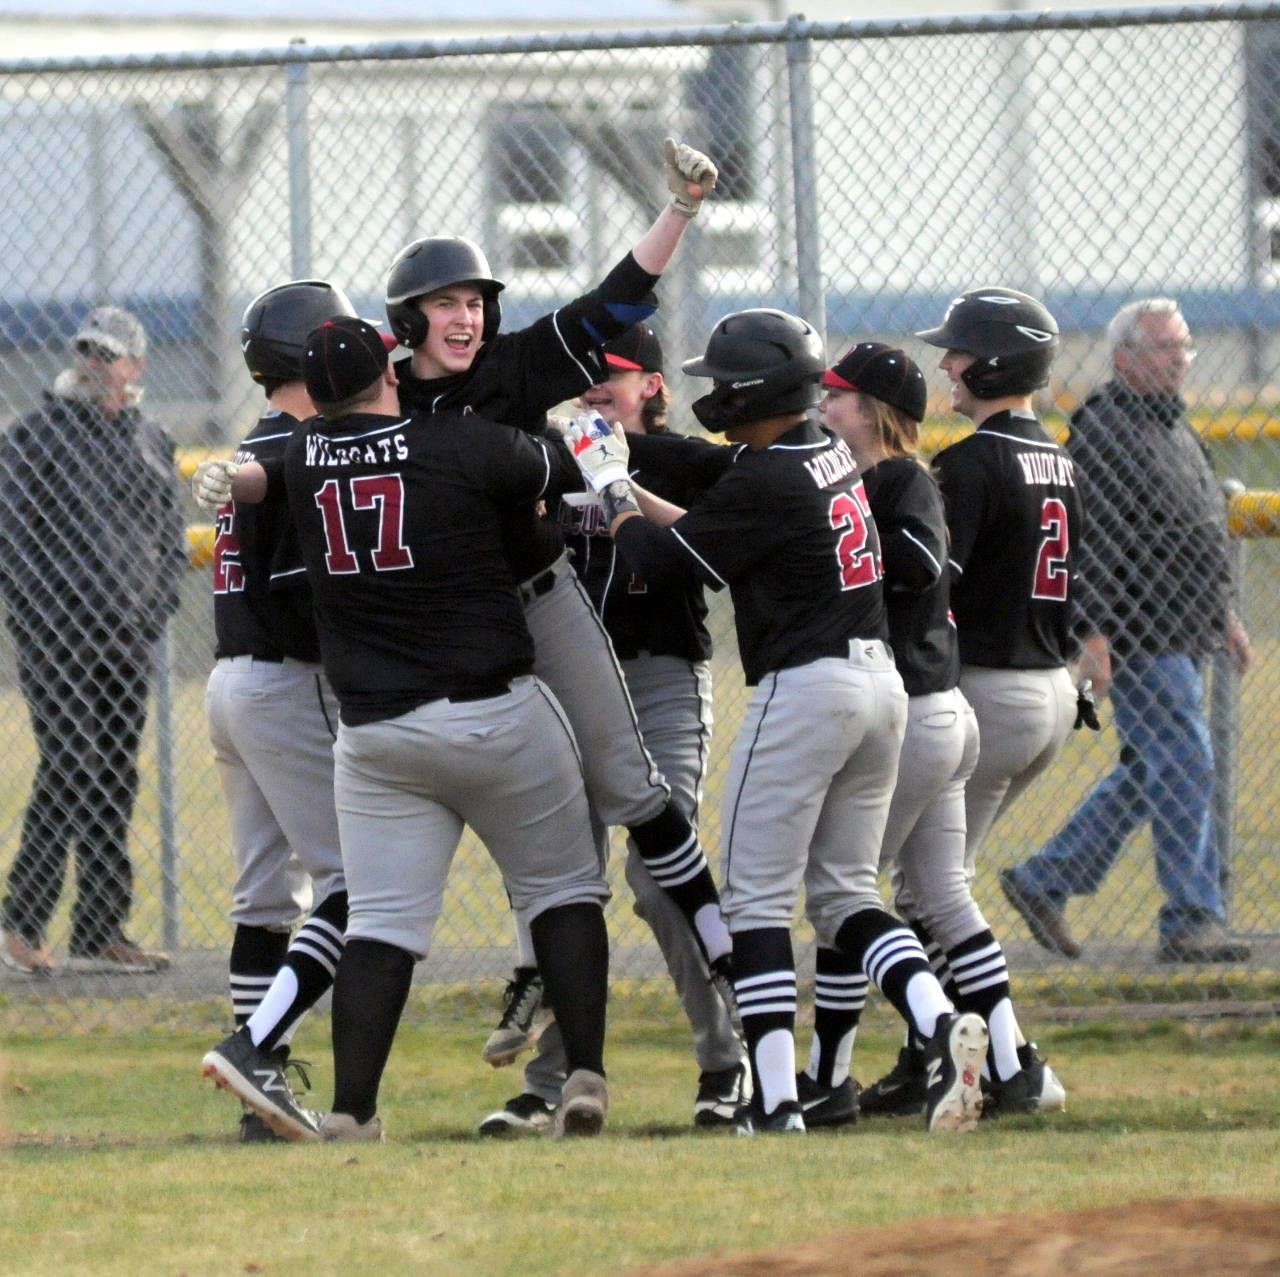 Ocosta’s Colby Scheuber (arm raised) celebrates with teammates after driving in the game-winning run with a single in the bottom of the eighth inning in game two of a doubleheader on Saturday in Pe Ell. (Ryan Sparks | Grays Harbor News Group)